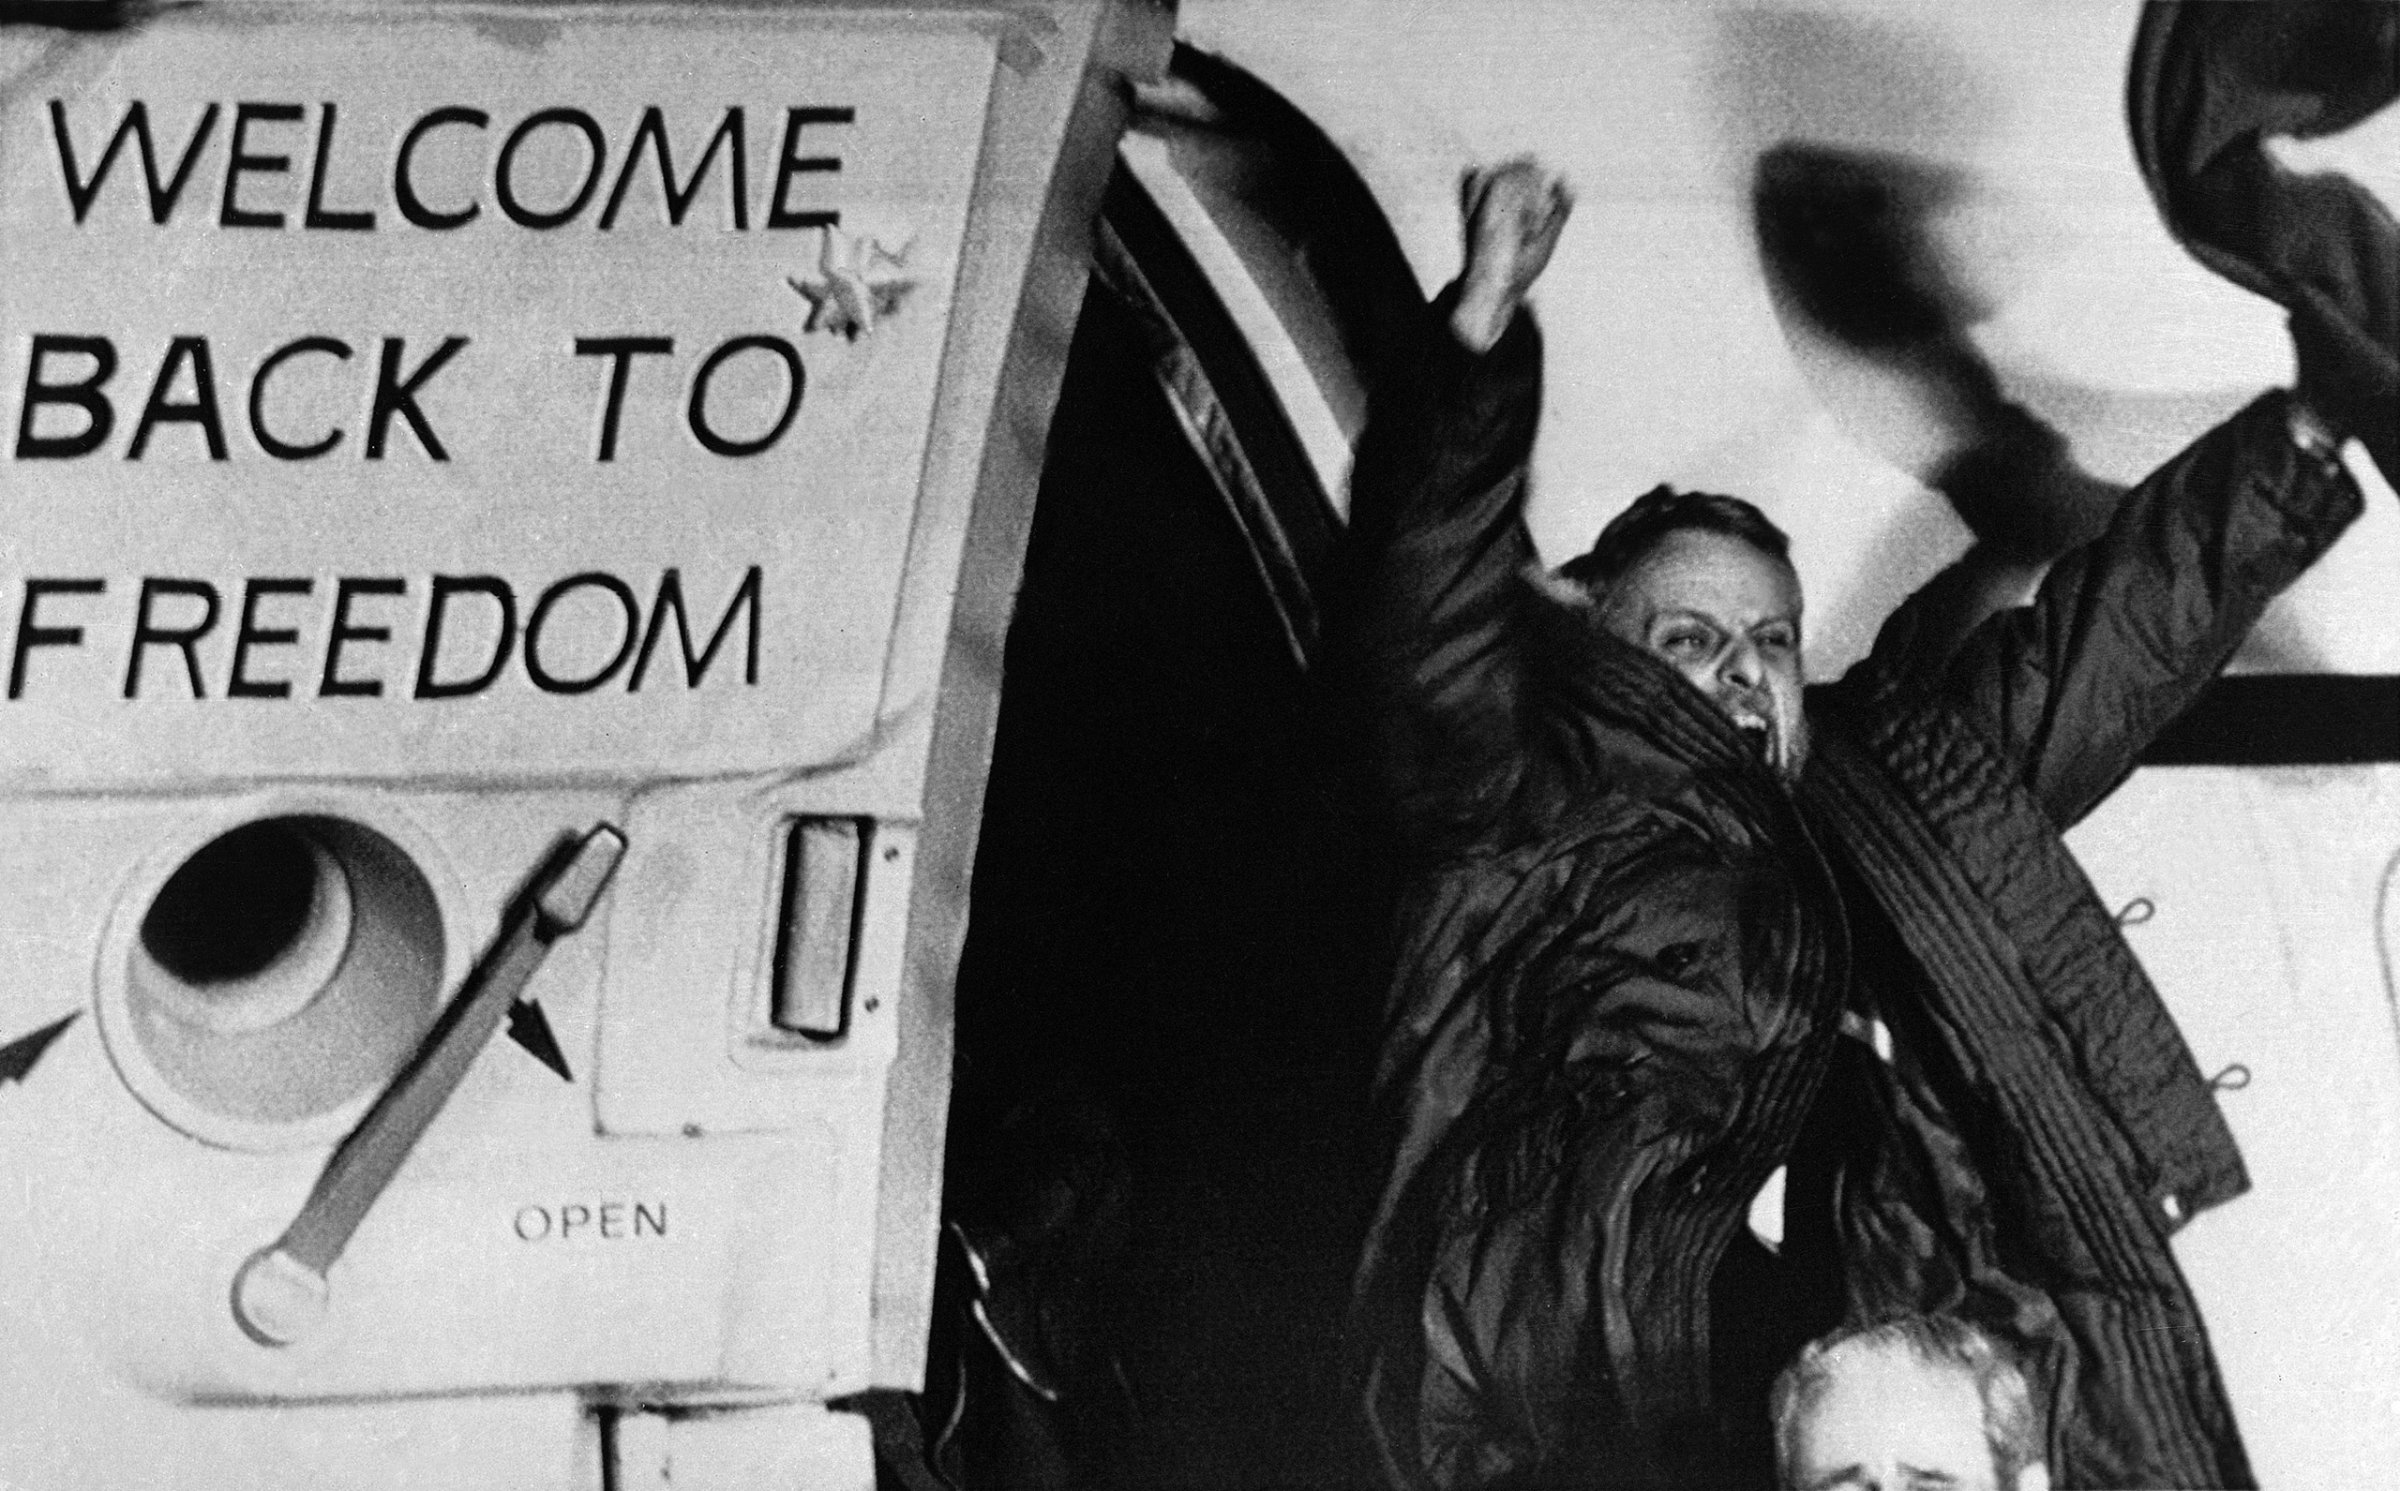 Freed U.S. hostage David Roeder shouts and waves as he arrives at Rhein-Main U.S. Air Force base in Frankfurt, Germany. Roeder was among 52 Americans held hostage in Iran for 444 days after their capture at the U.S. Embassy in Tehran. January 21, 1981.